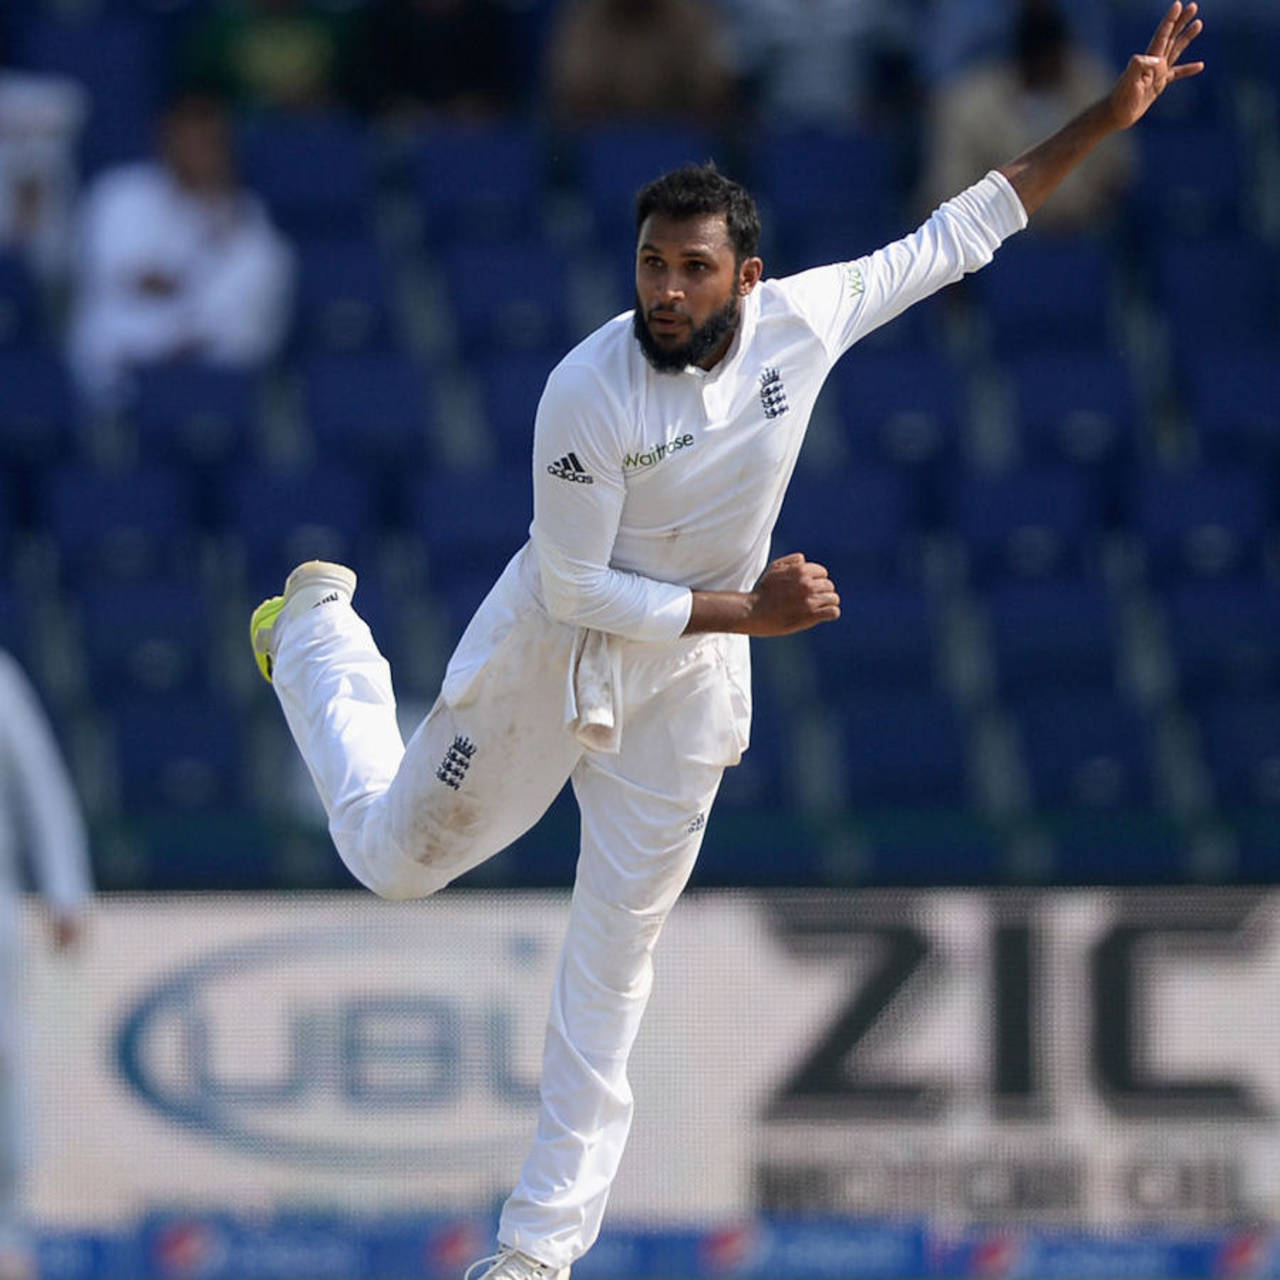 Adil Rashid became the first England legspinner to take five wickets since 1959, Pakistan v England, 1st Test, Abu Dhabi, 5th day, October 17, 2015